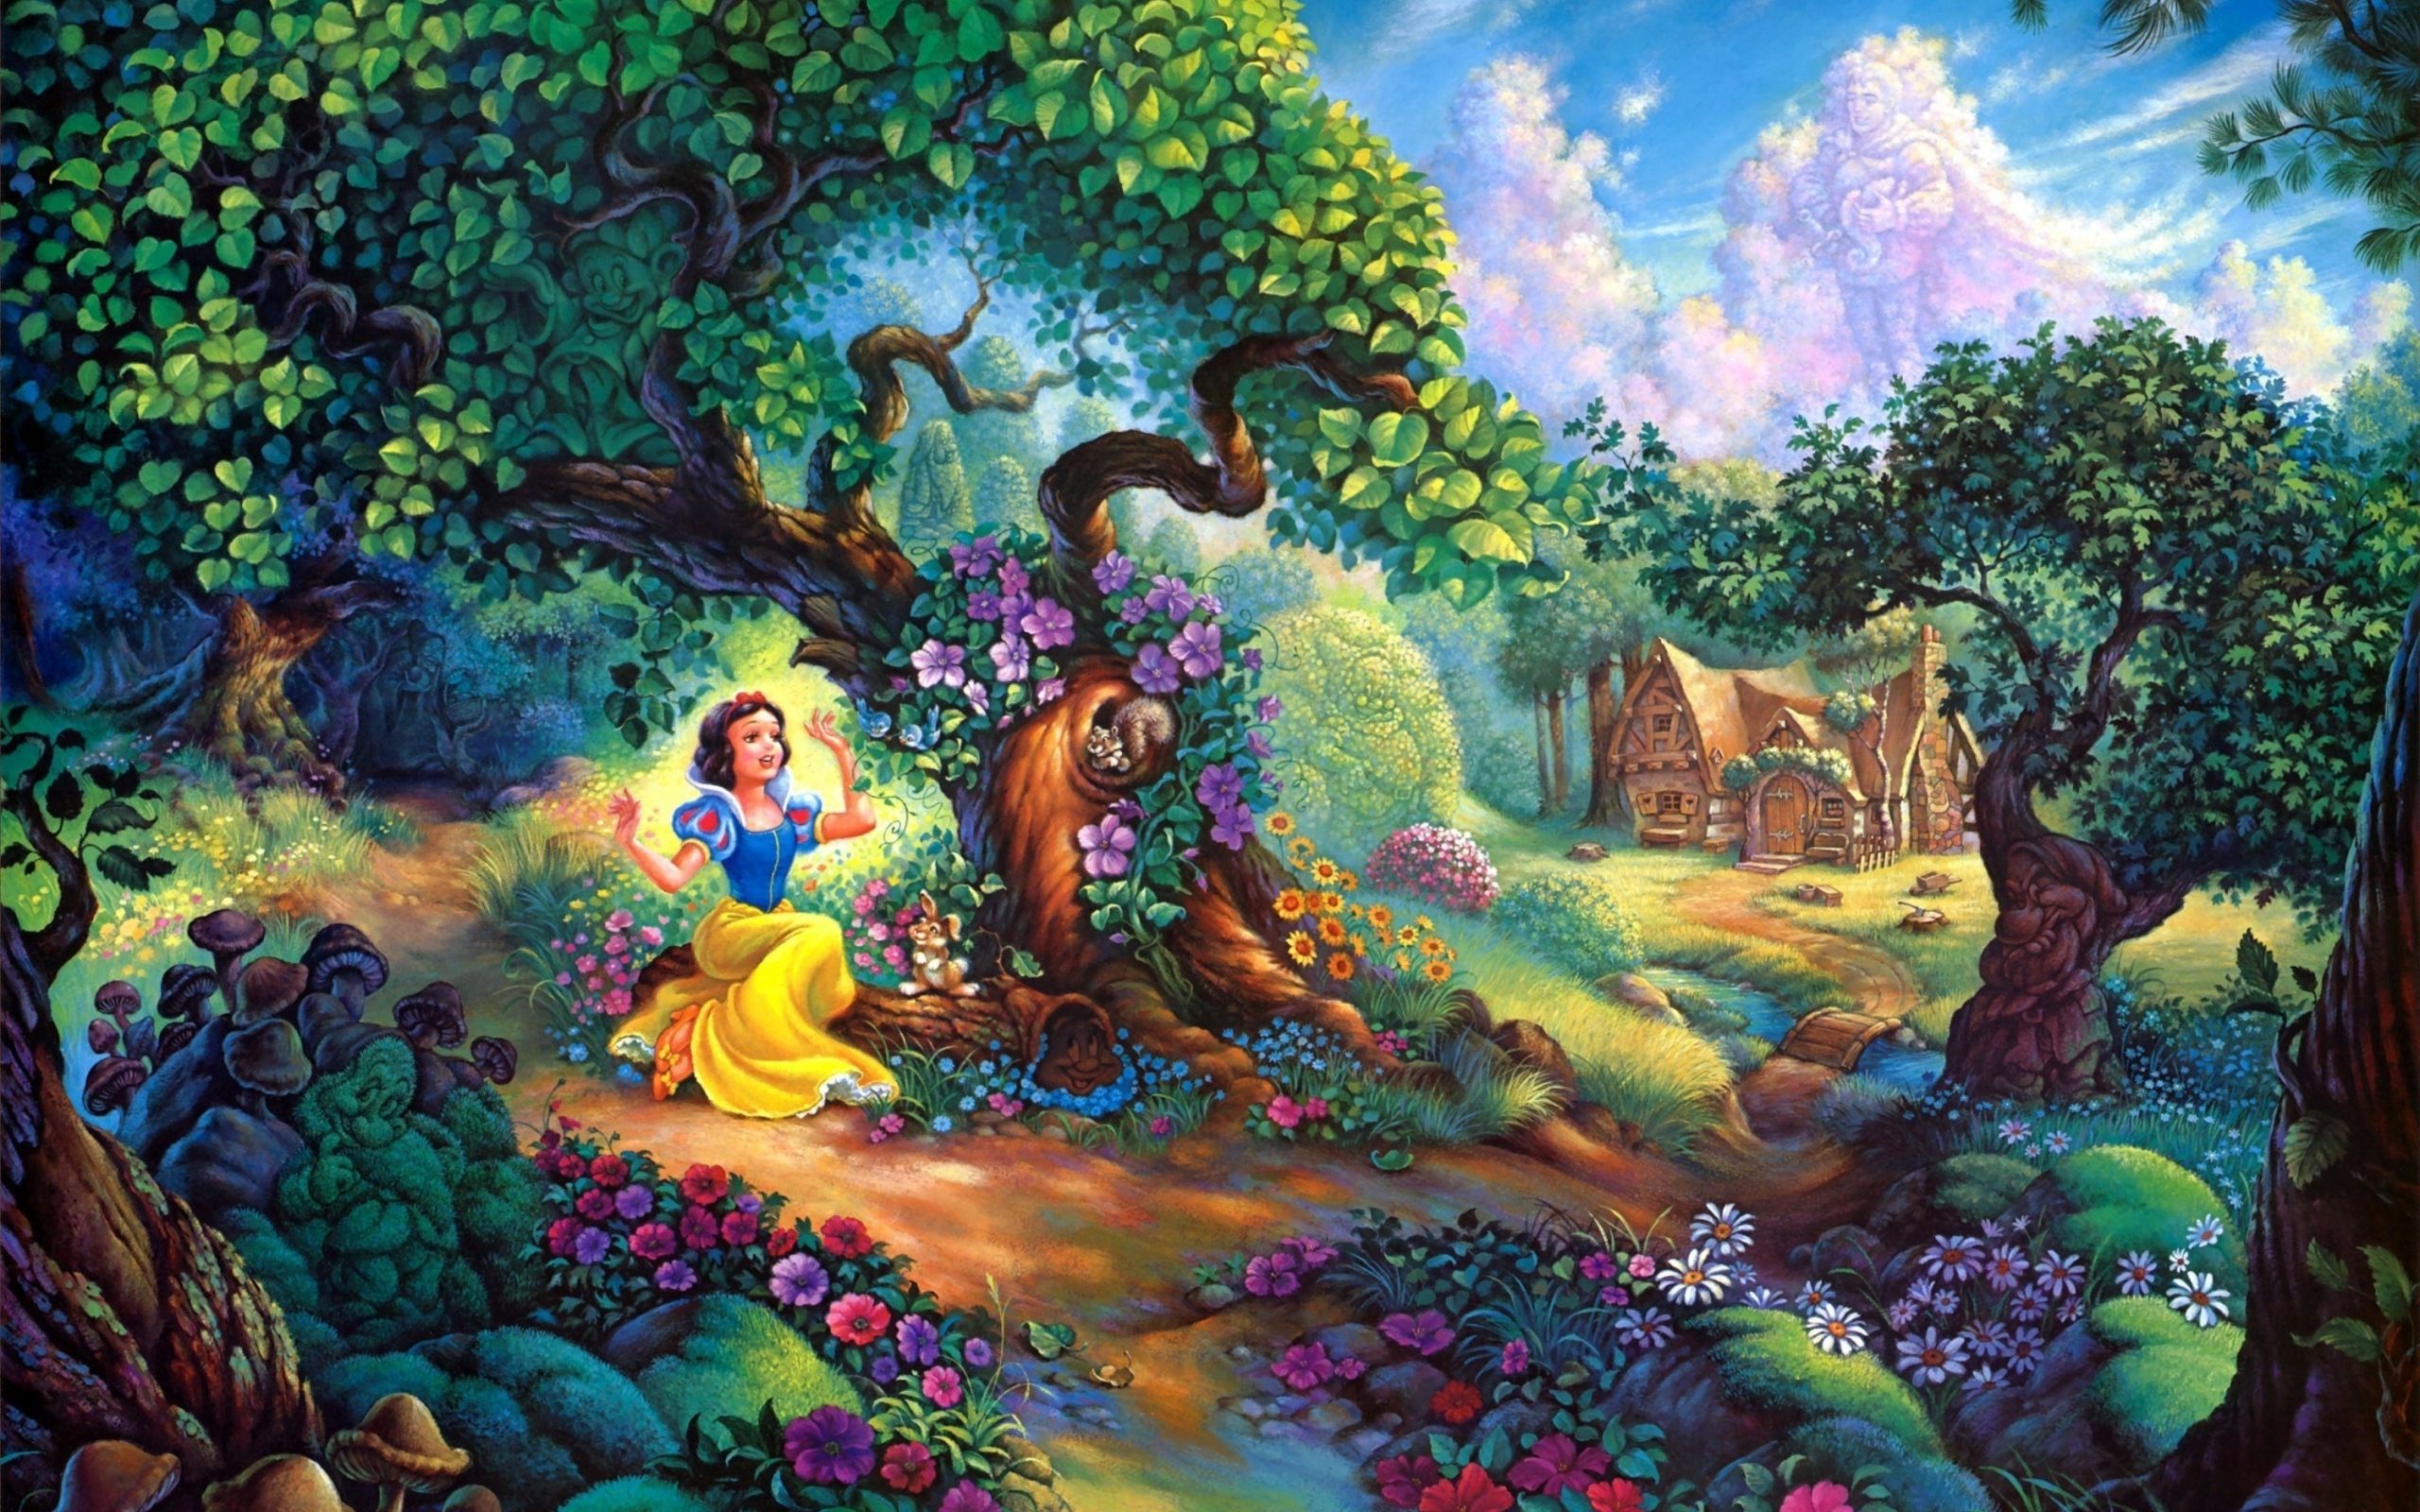 Disney Wallpaper HD Background Of Your Choice